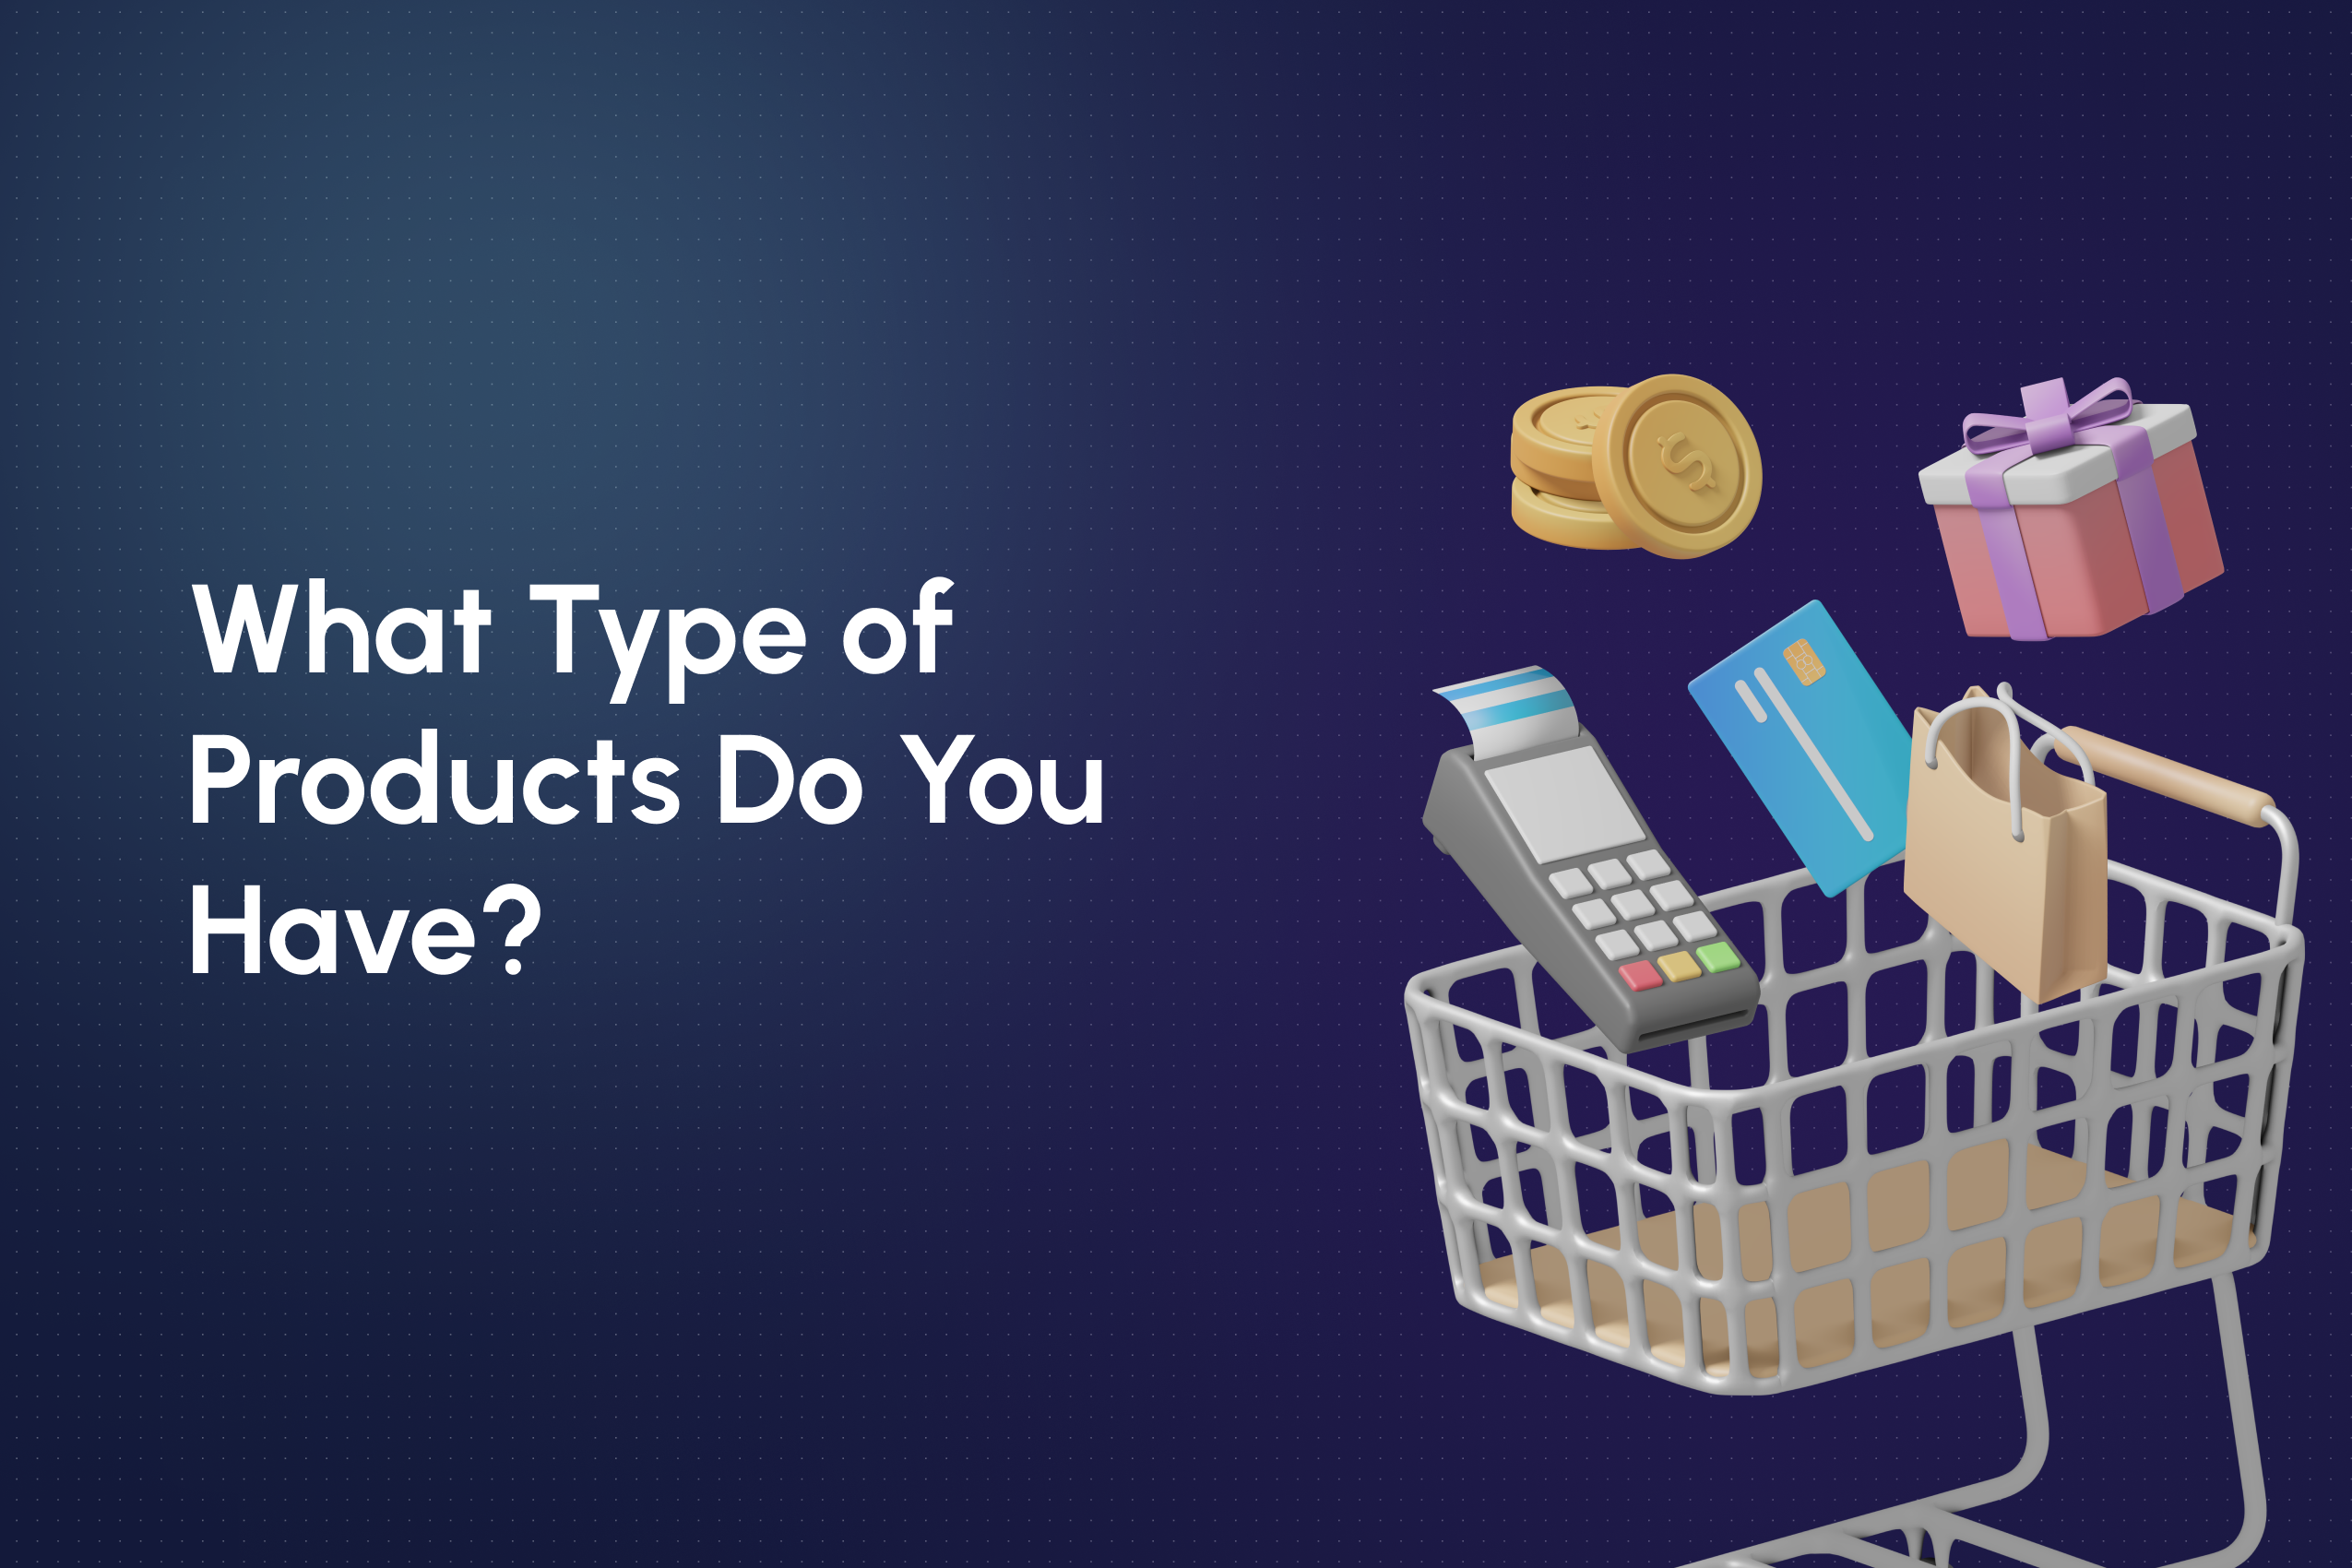 What Type of Products Do You Have